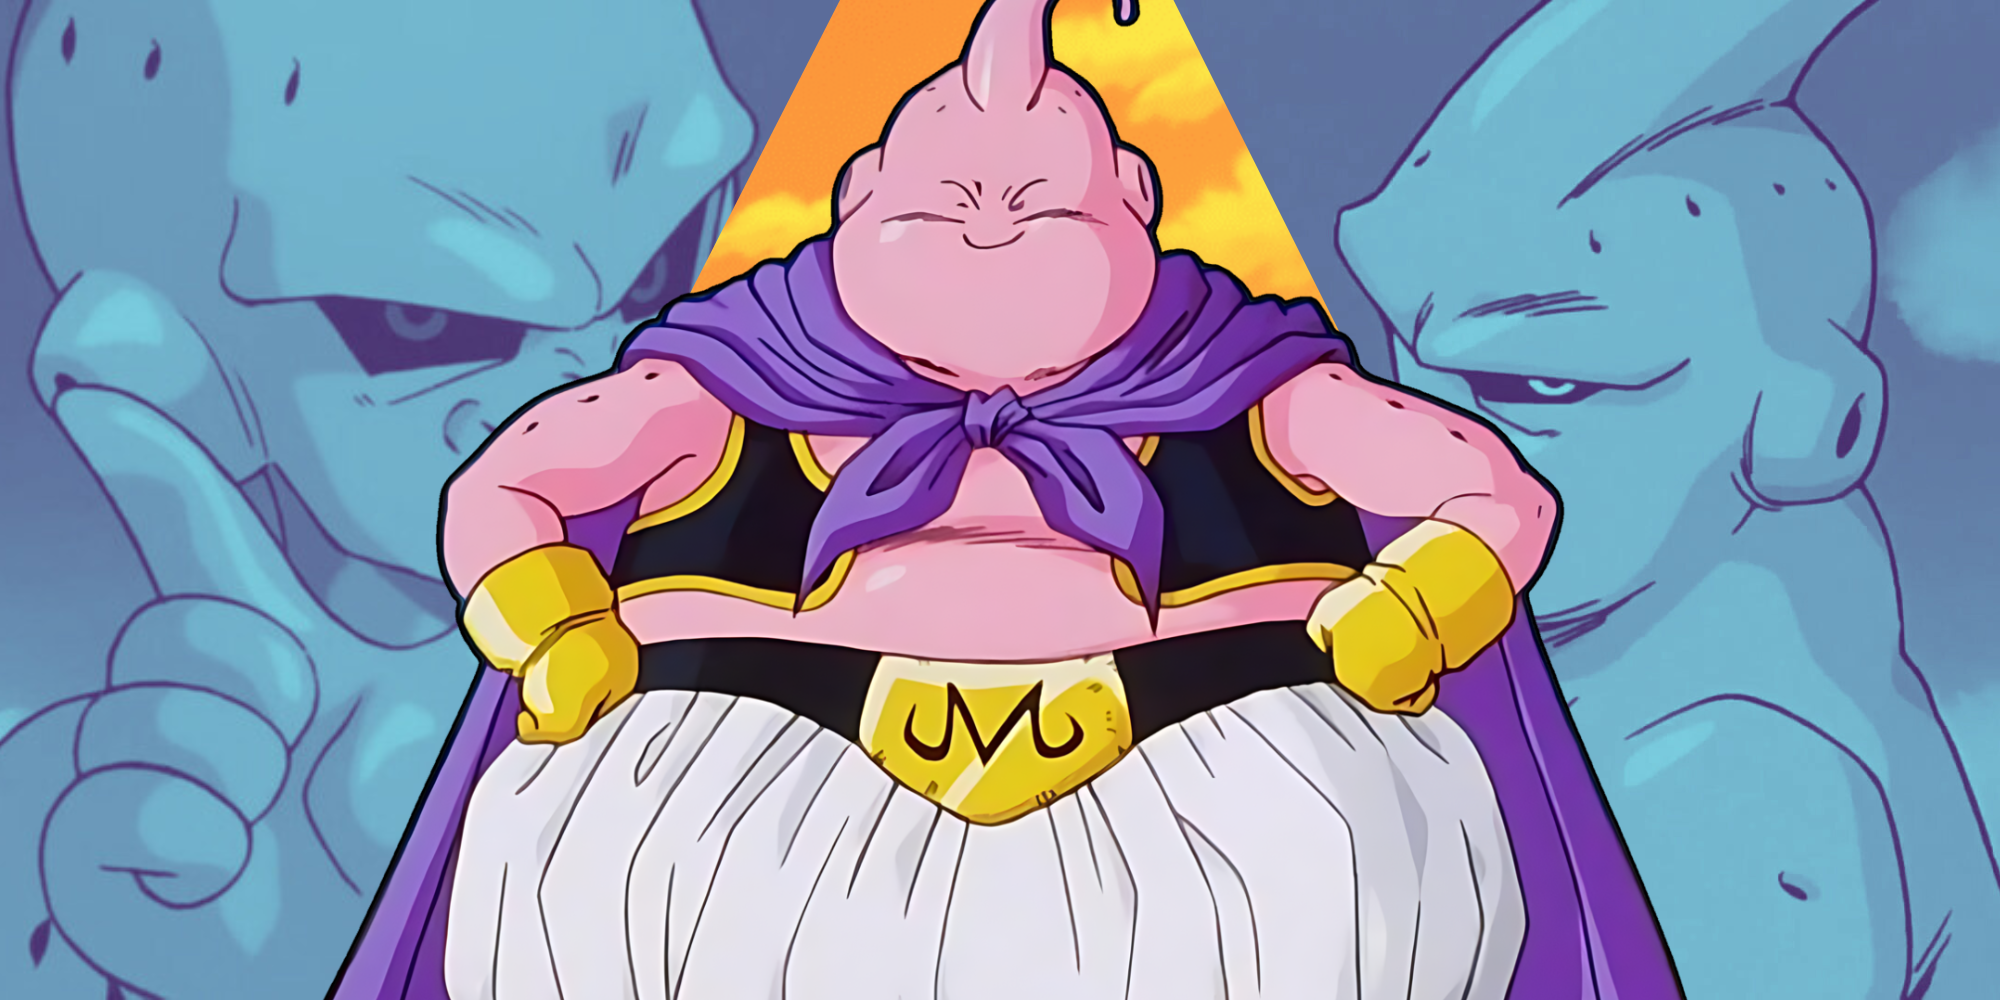 Custom Image of Majin Buu in the center with Kid Buu to the left and Super Buu to the right from Dragon Ball